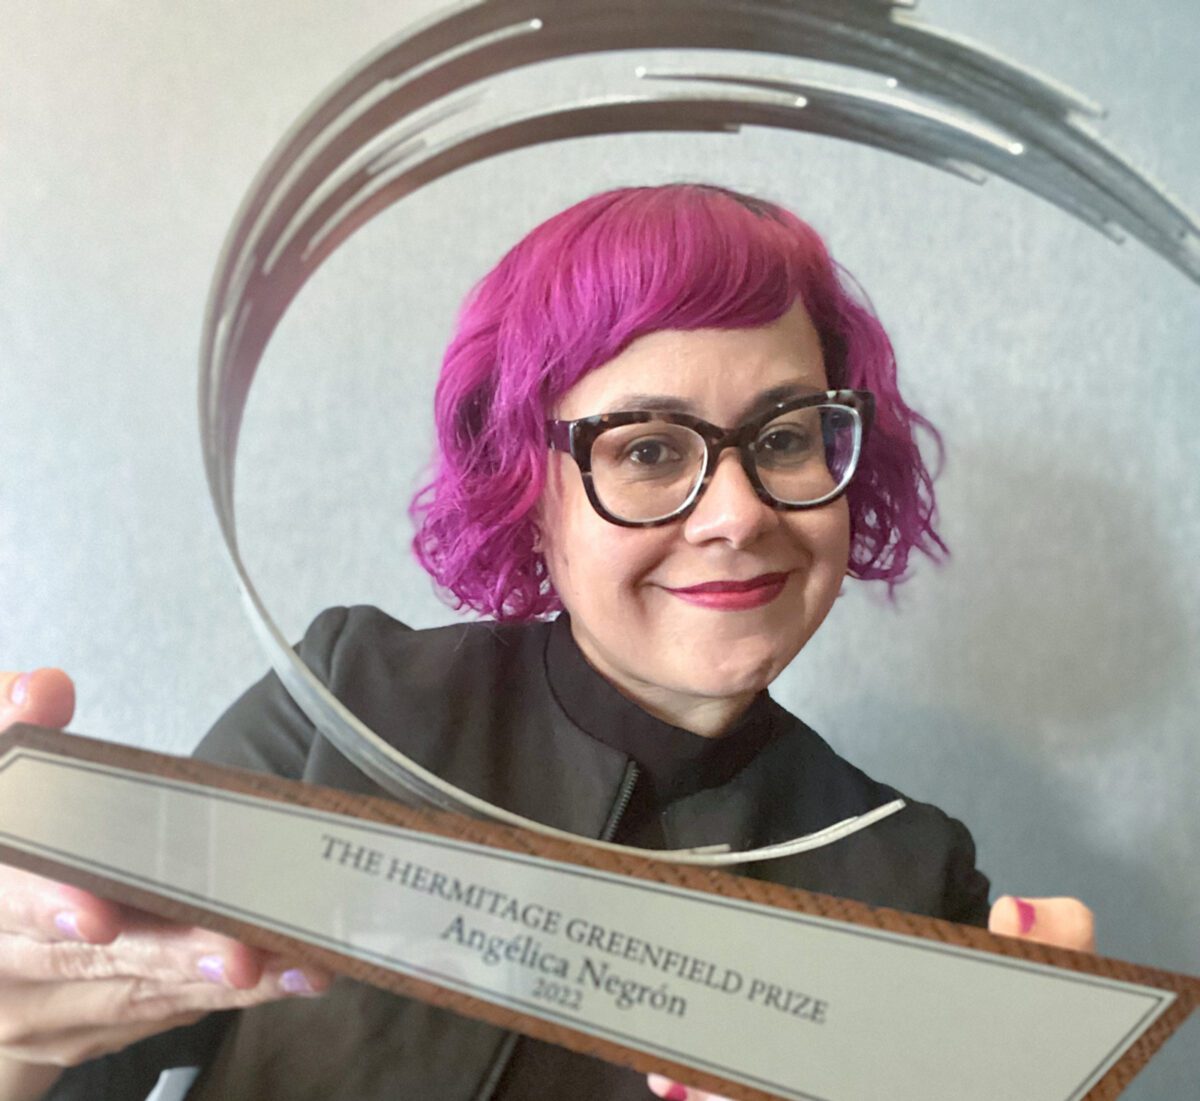 Composer Angélica Negrón Celebrated at 2022 Hermitage Greenfield Prize Dinner